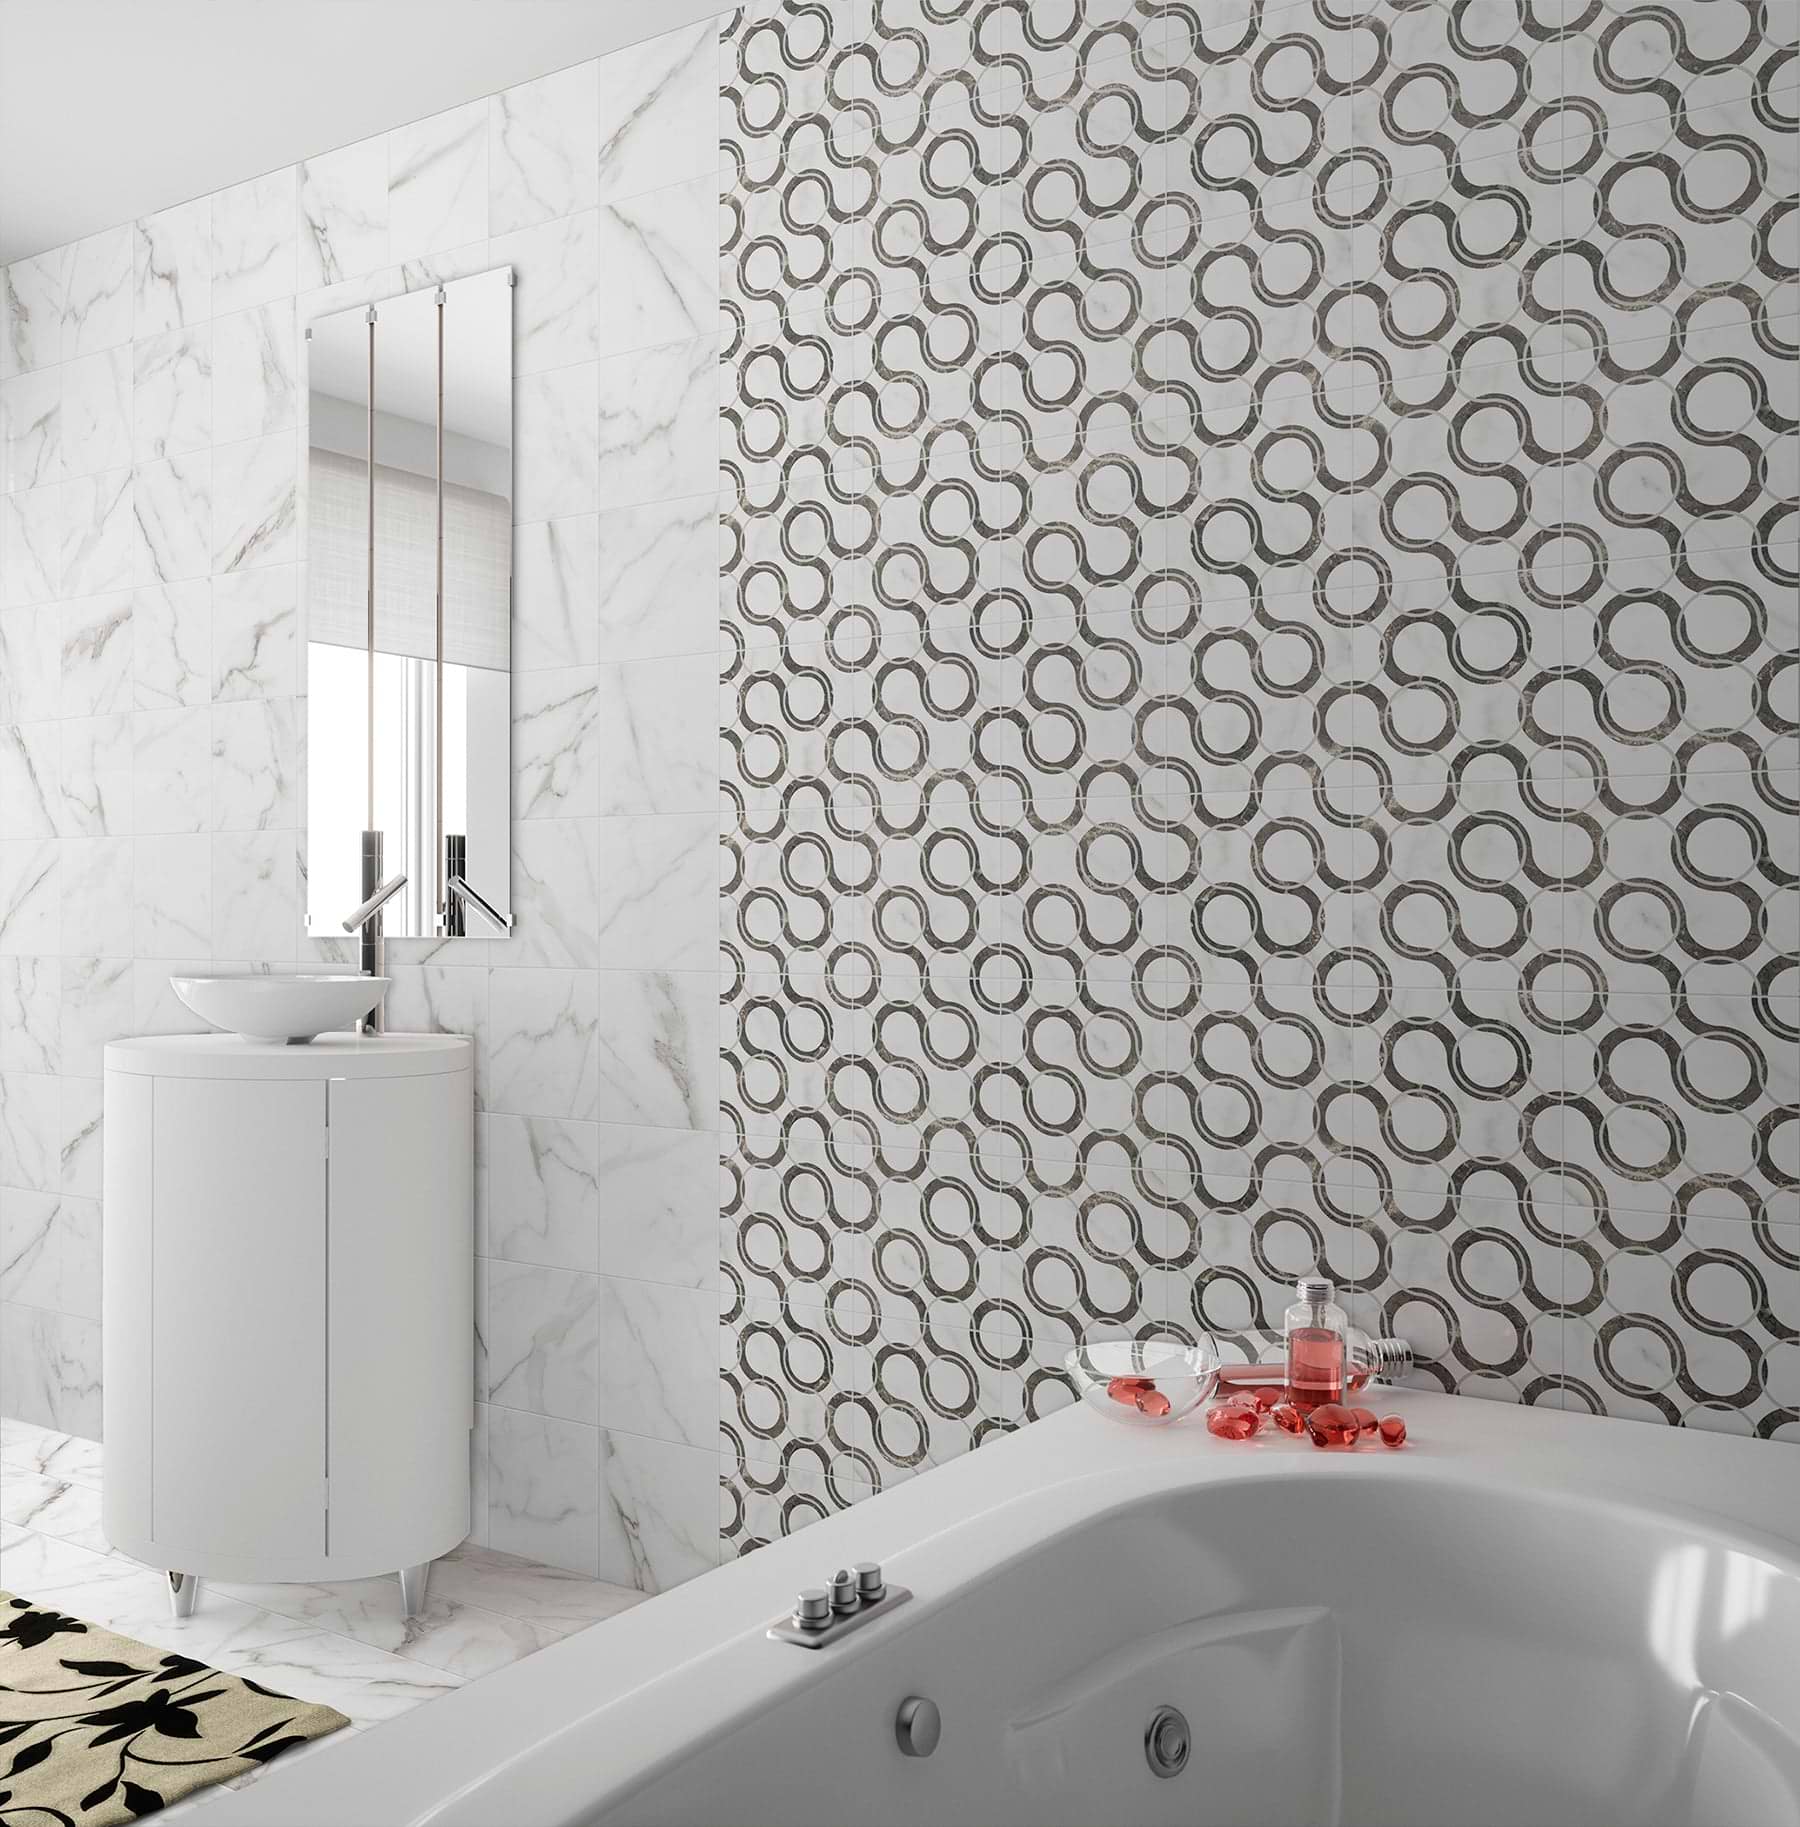 How to choose patterned floor tiles & wall tiles for your home - Hyperion Tiles